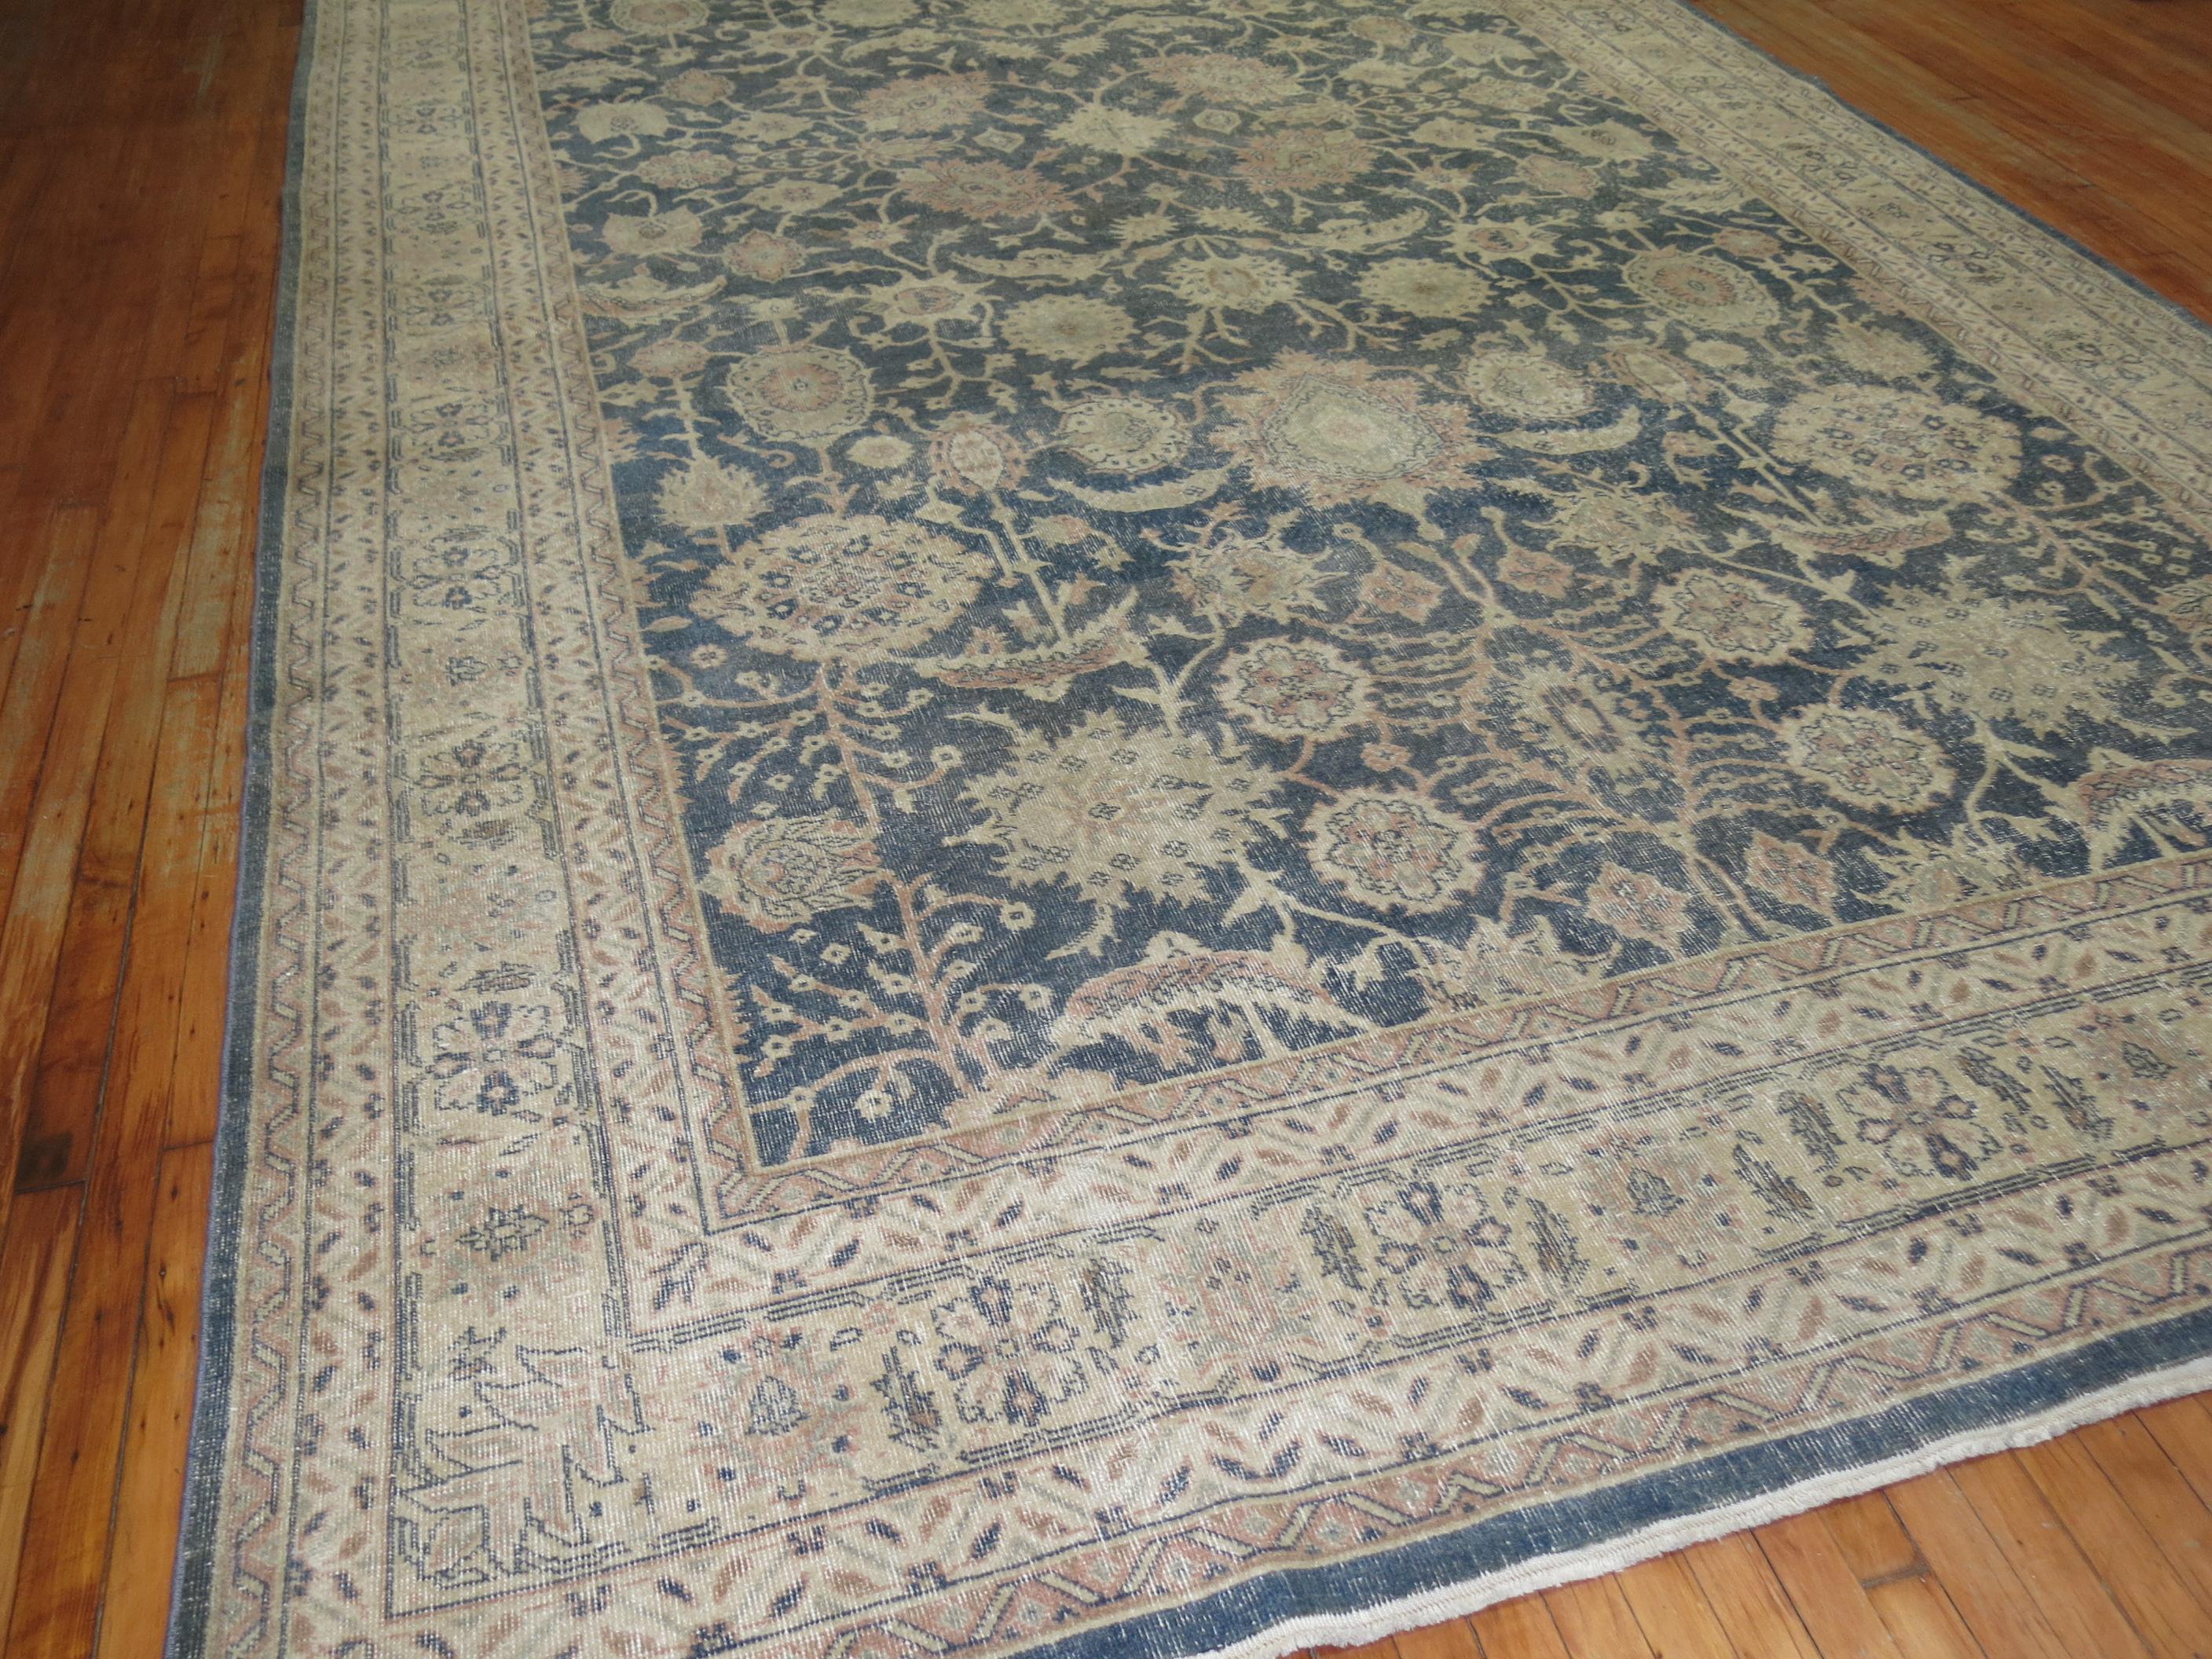 An evenly worn oversize mid-20th-century Turkish rug in predominant blue-gray, accents in peach.

Measures: 9'7